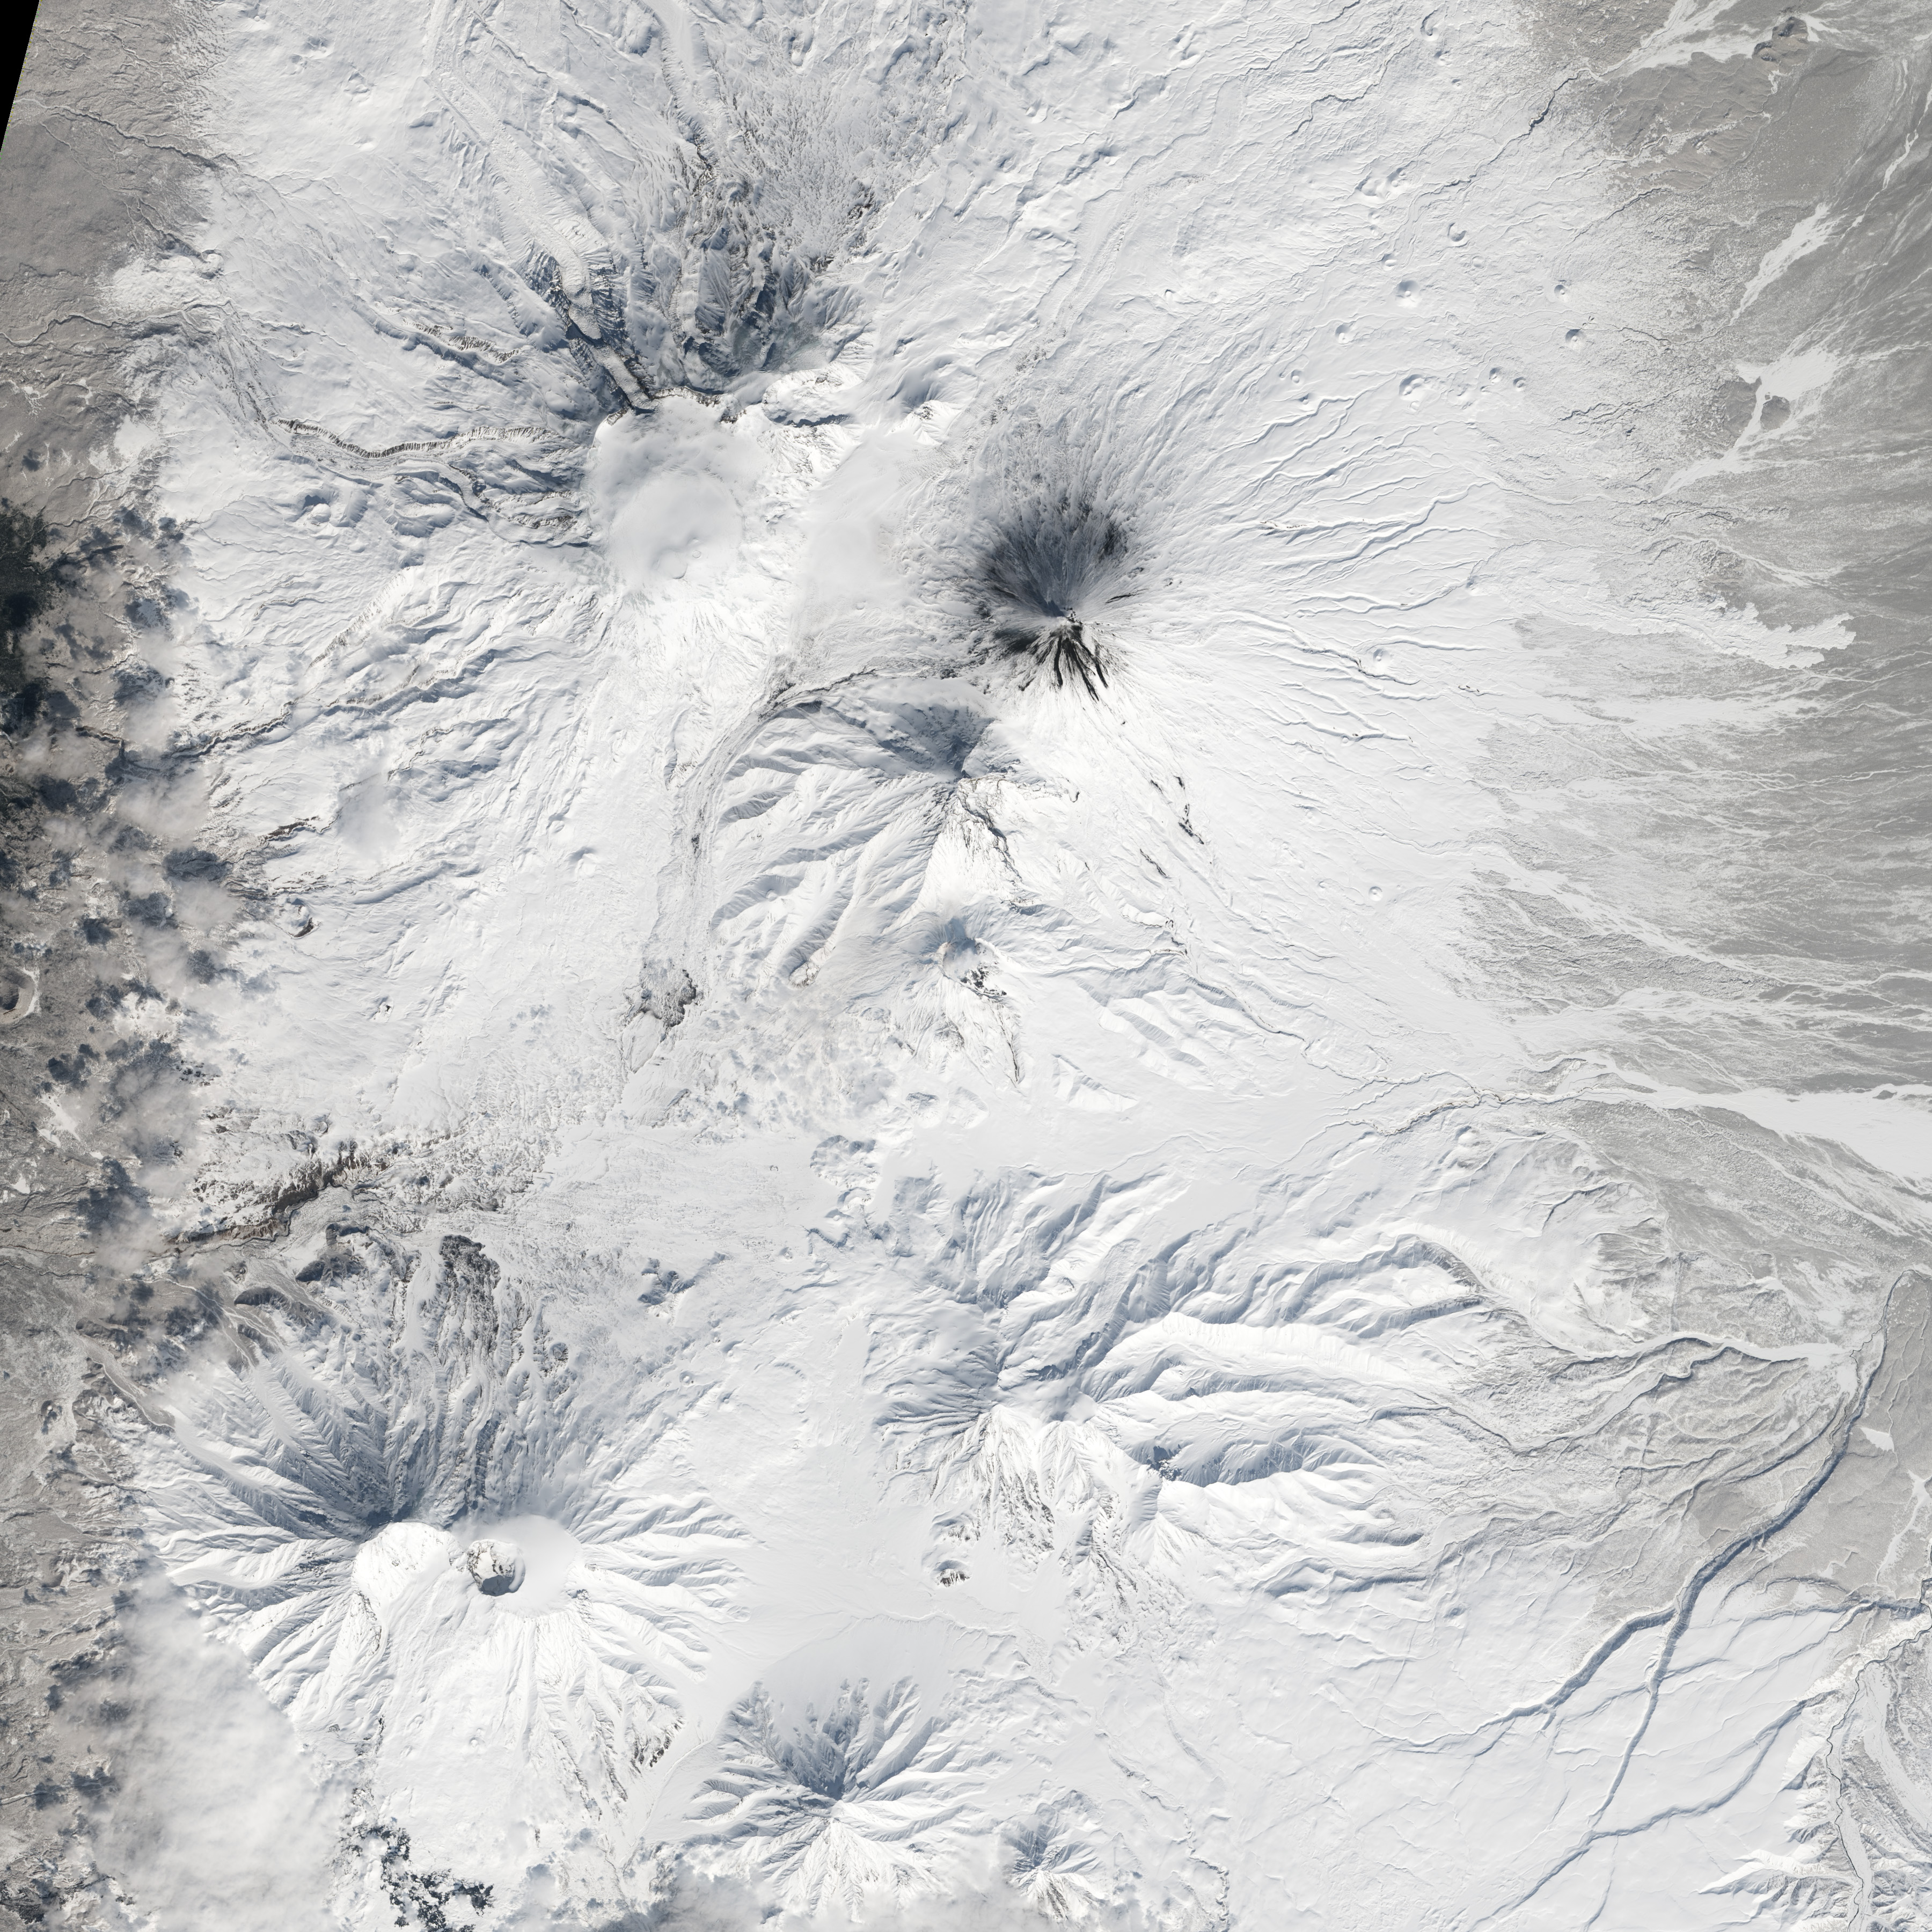 Five Volcanoes Erupting at Once - related image preview